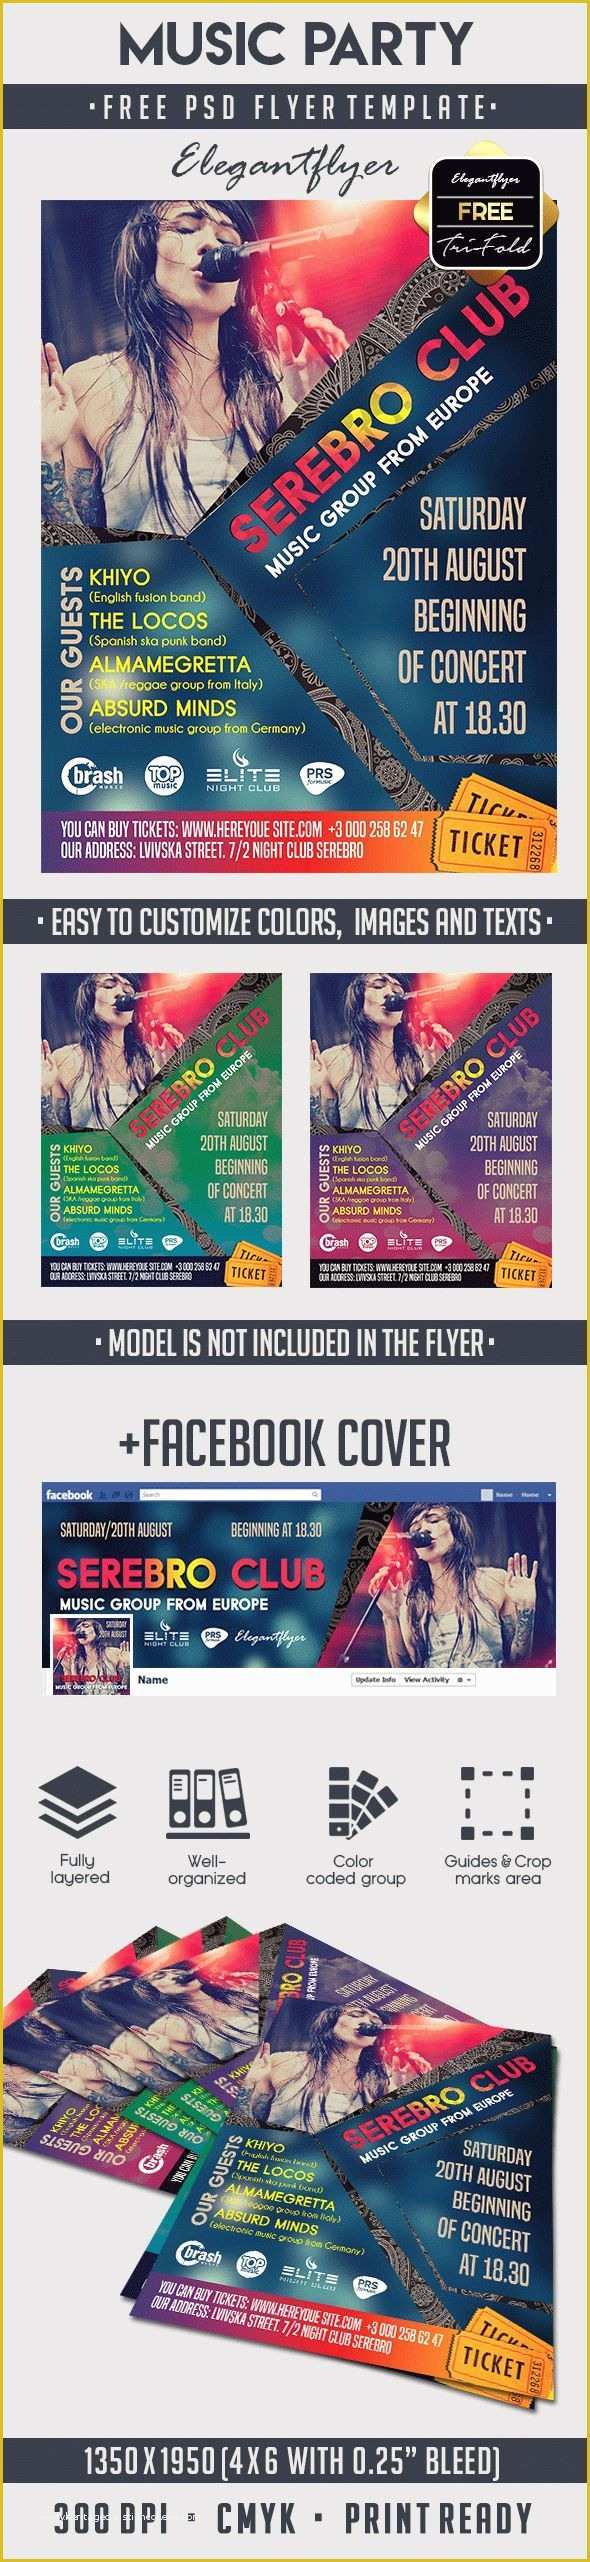 Free Music event Flyer Templates Of Music Party – Free Psd Flyer Template – by Elegantflyer